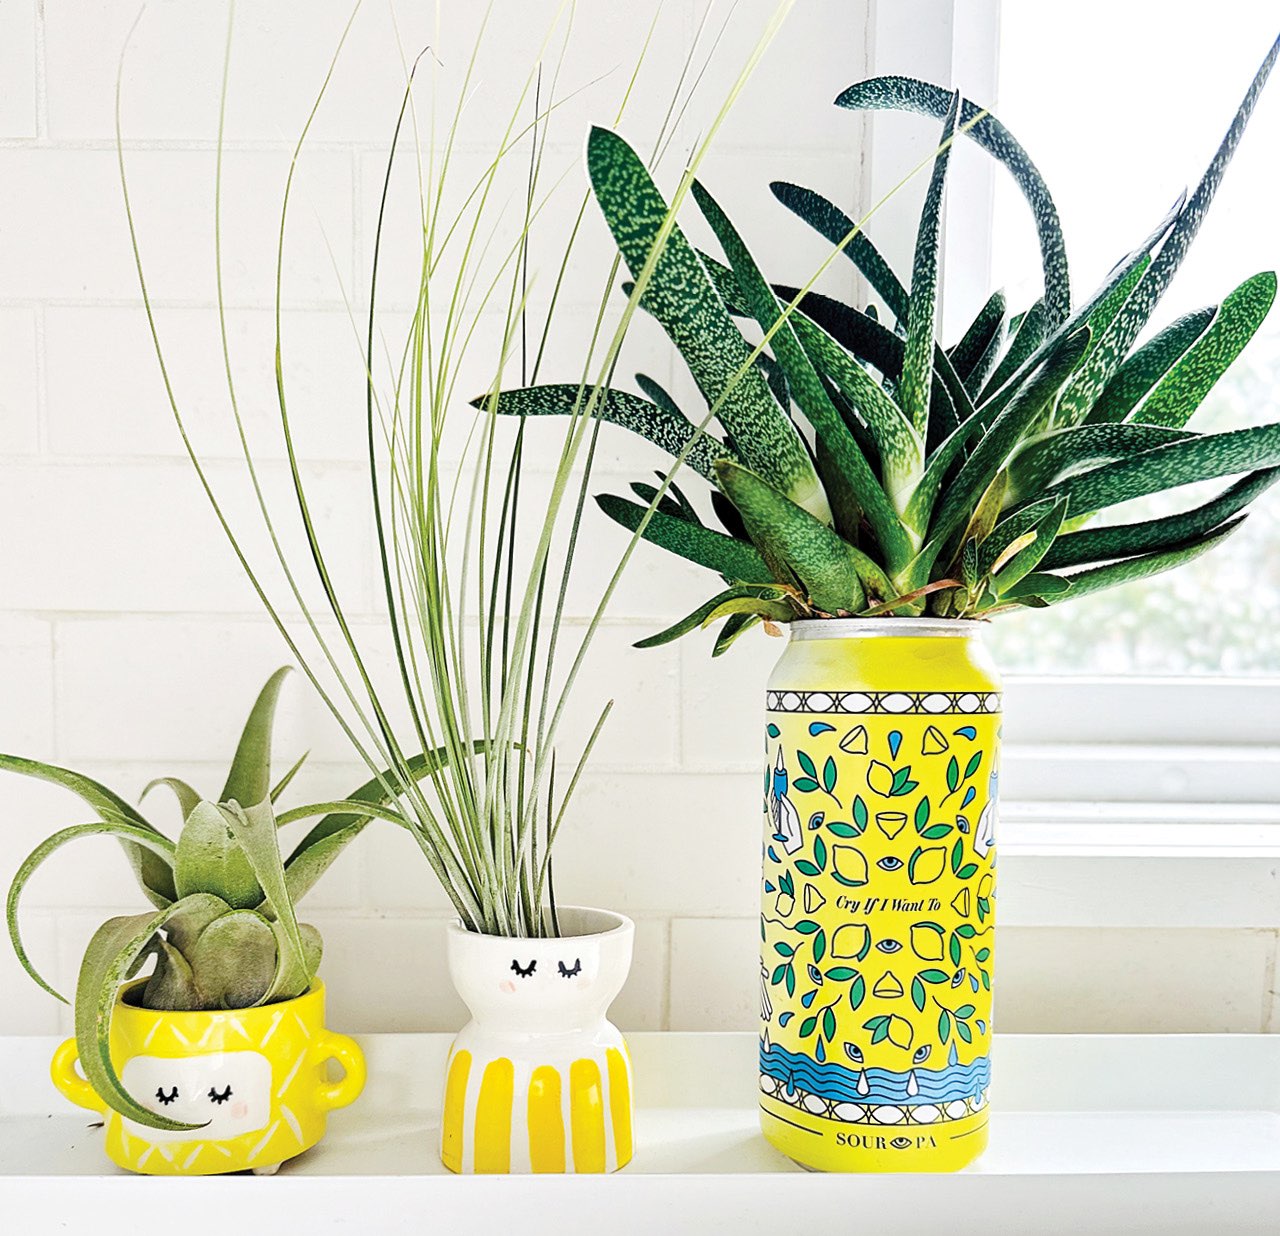 Three small houseplants in bright white and yellow ceramic pots